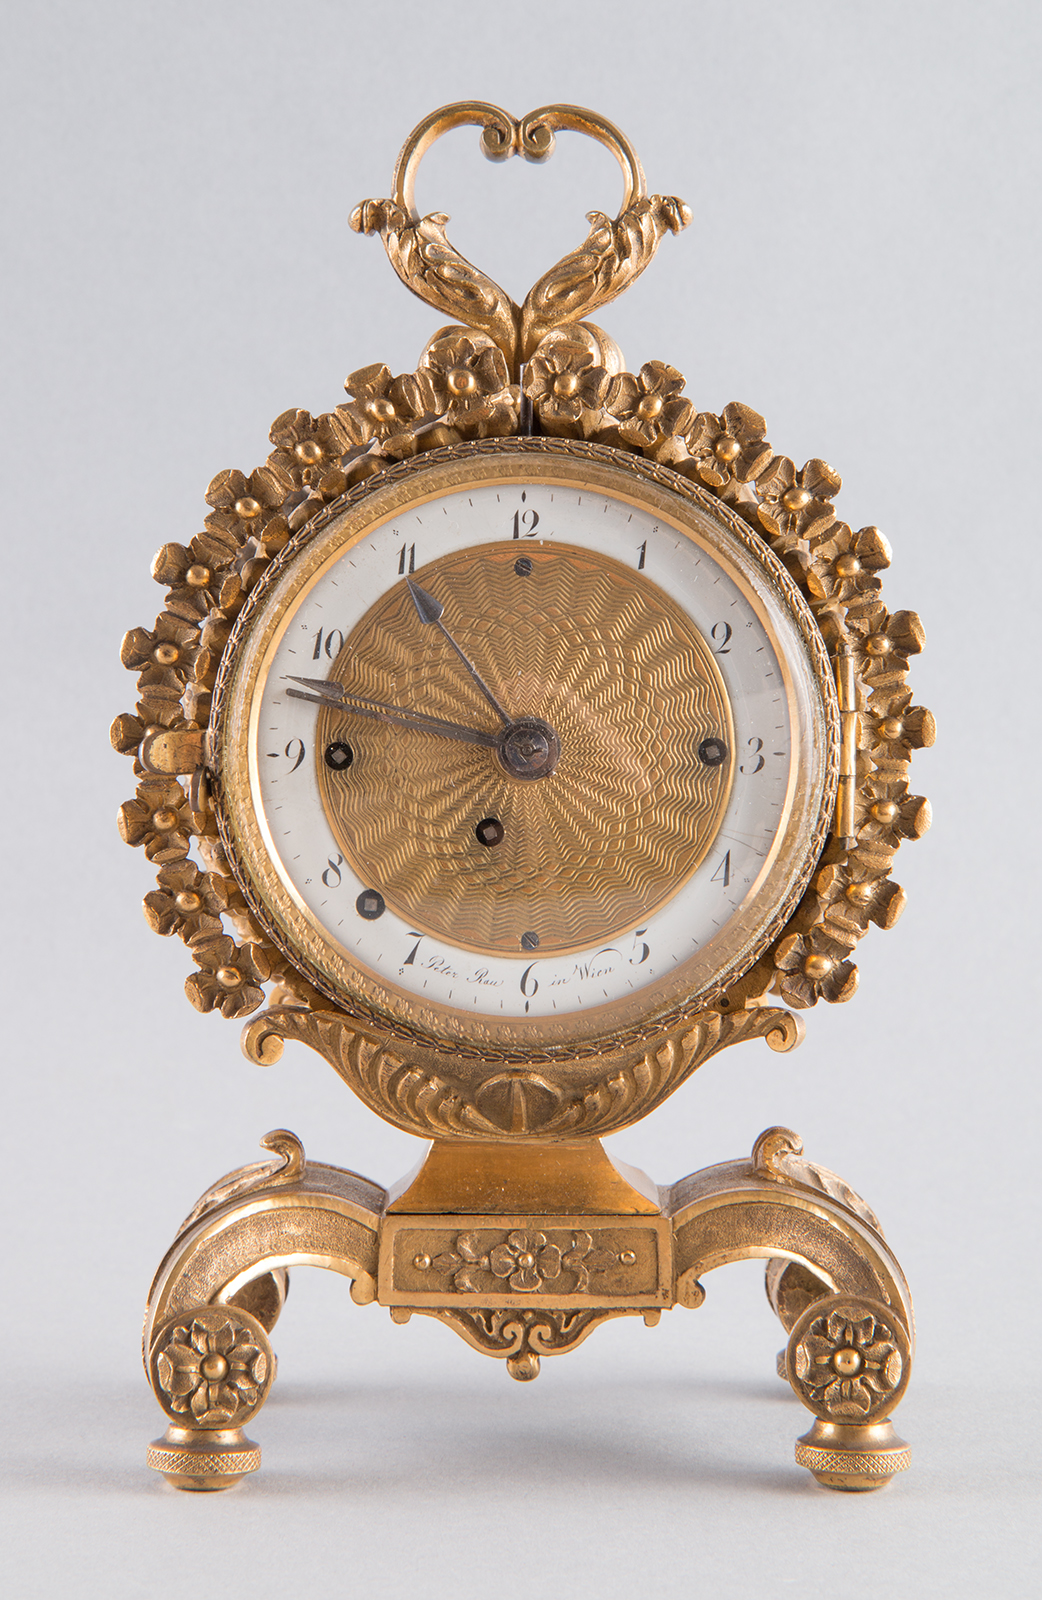 Antique carriage clock by Peter Rau, c. 1820.